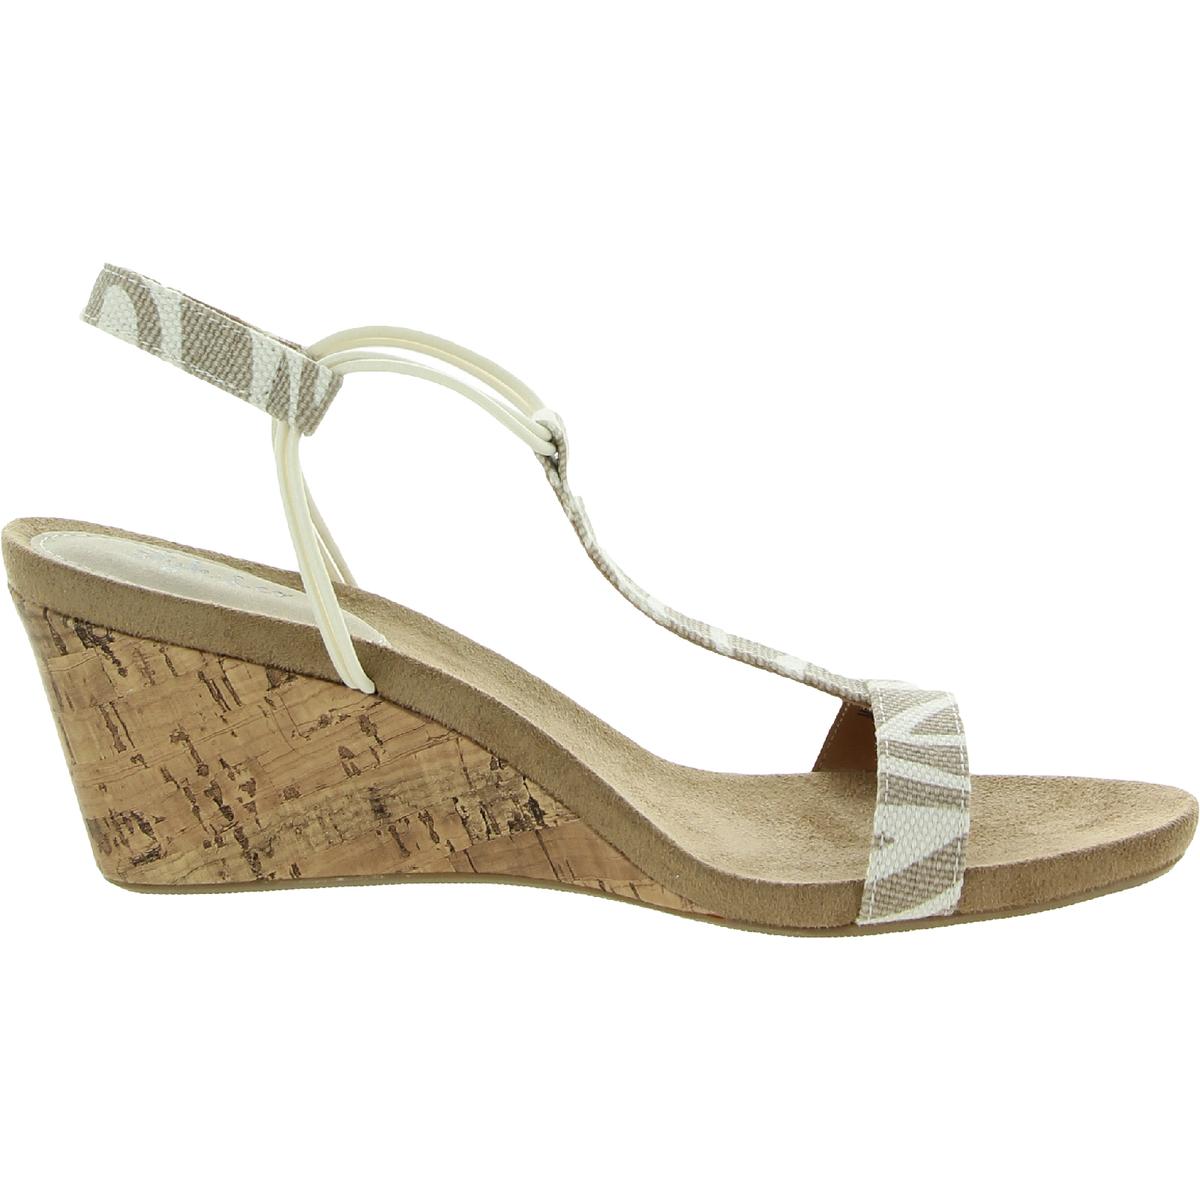 Womens Mulan Wedges Open Toe T-Strap Sandals Shoes BHFO 7957 Style & Co 